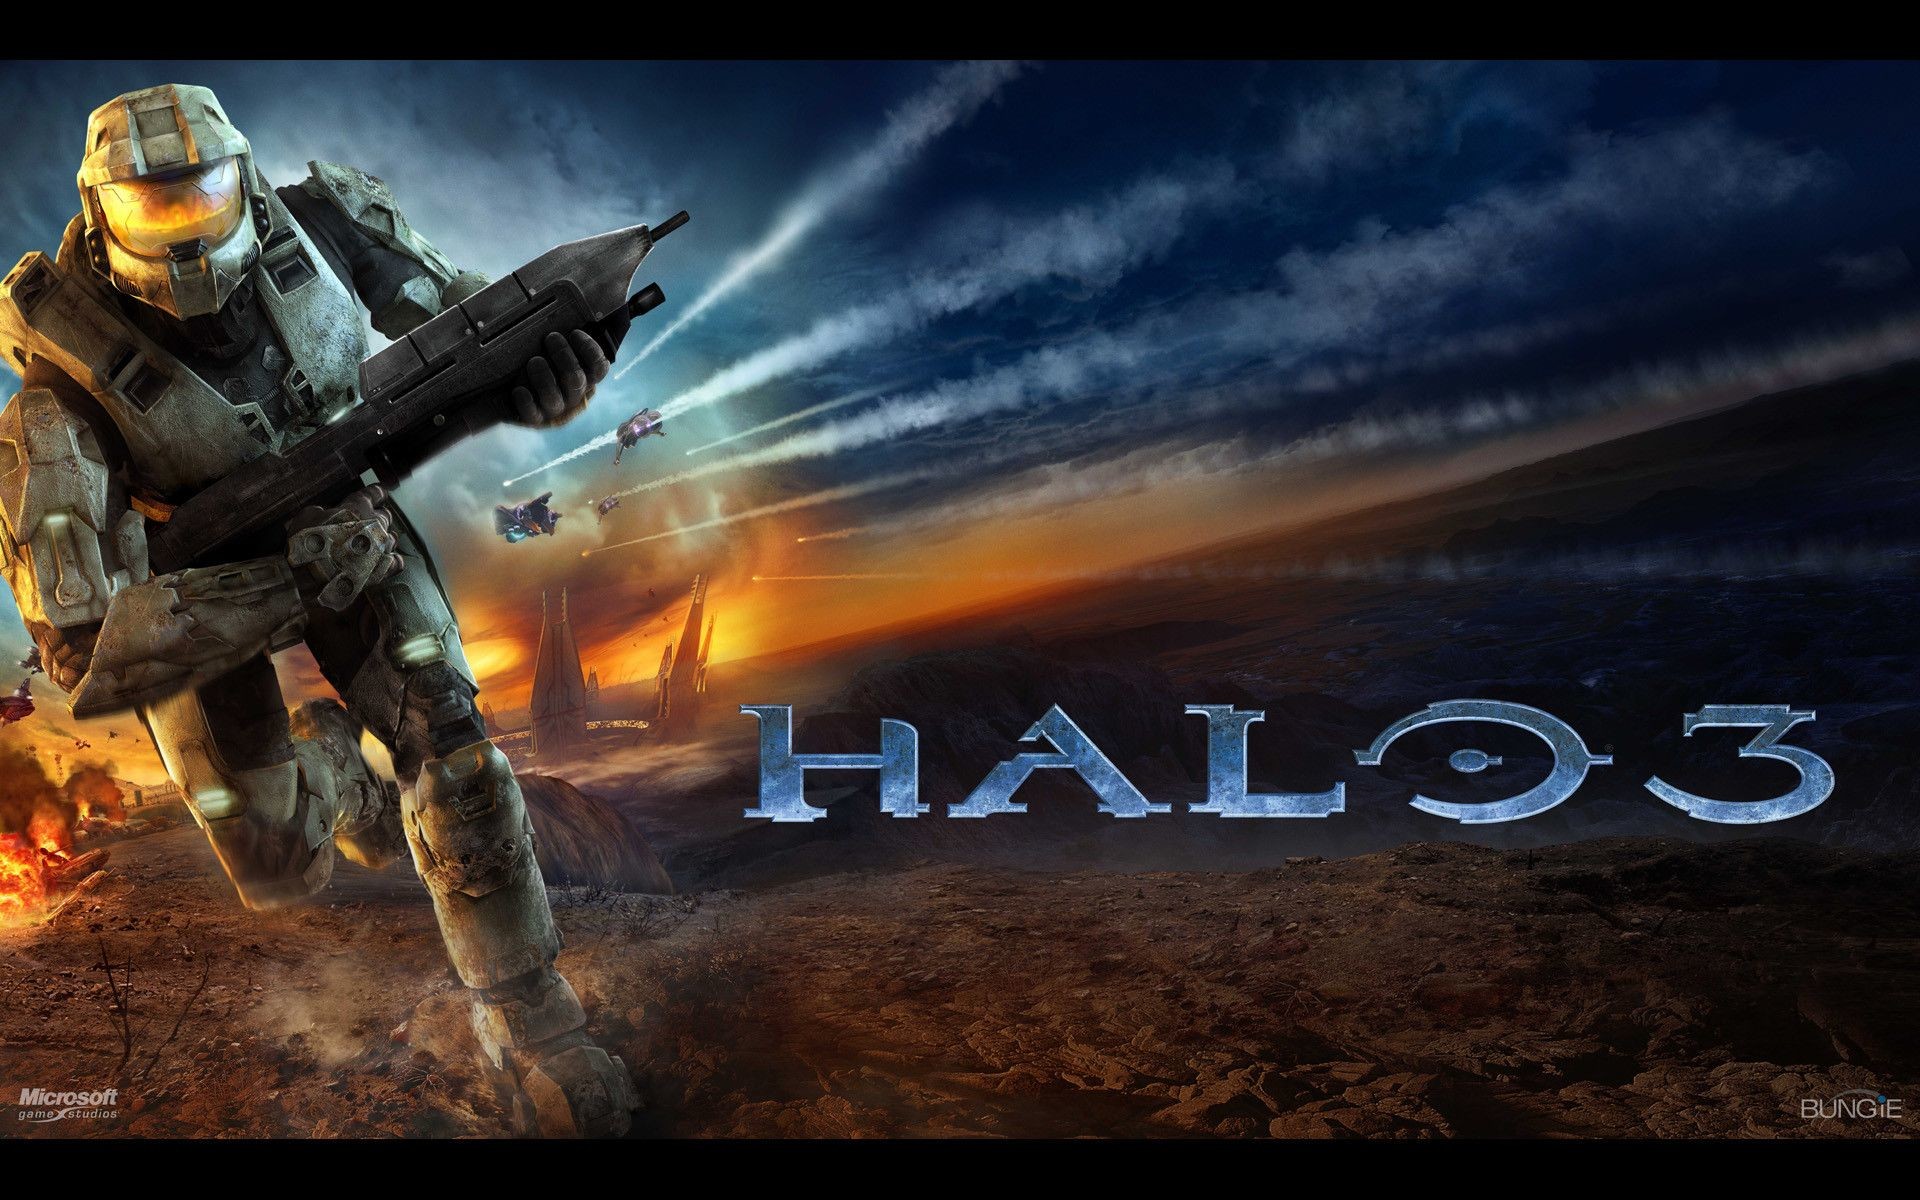 1920x1200 Halo Master Chief Wallpapers Amazing Wallpaperz | HD Wallpapers | Pinterest  | Hd wallpaper and Wallpaper